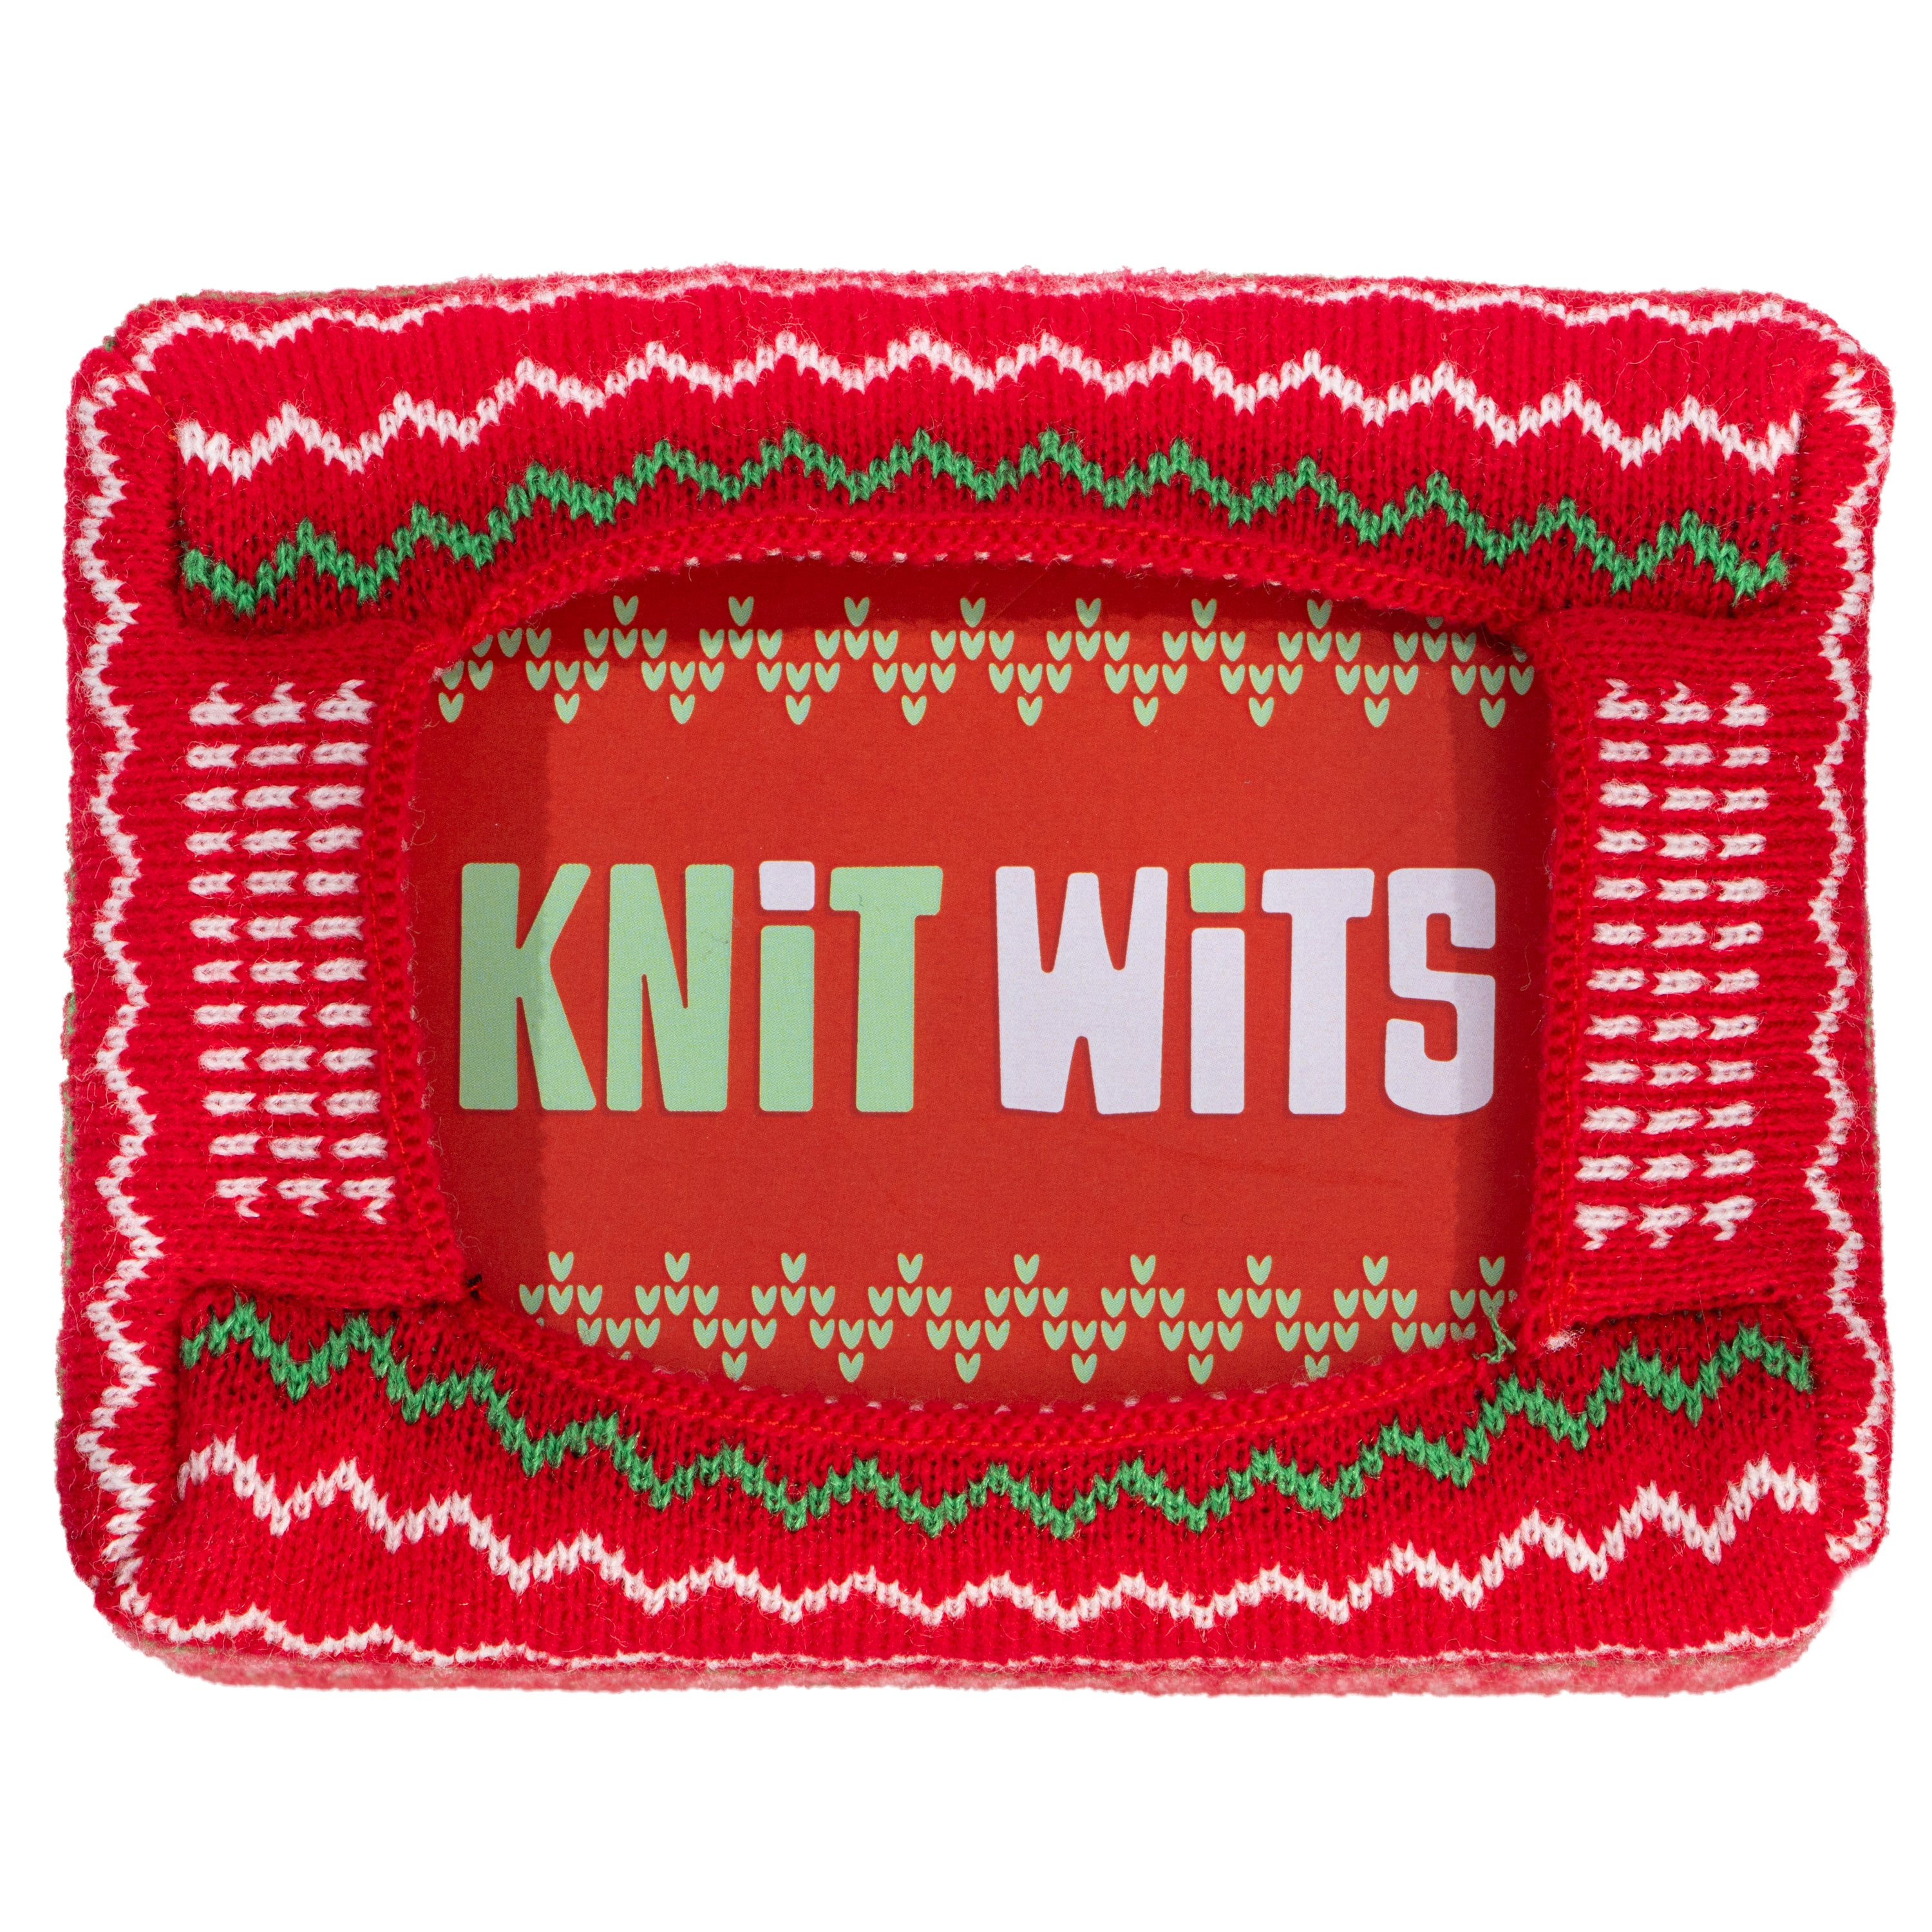 Knit Wits the Card Game